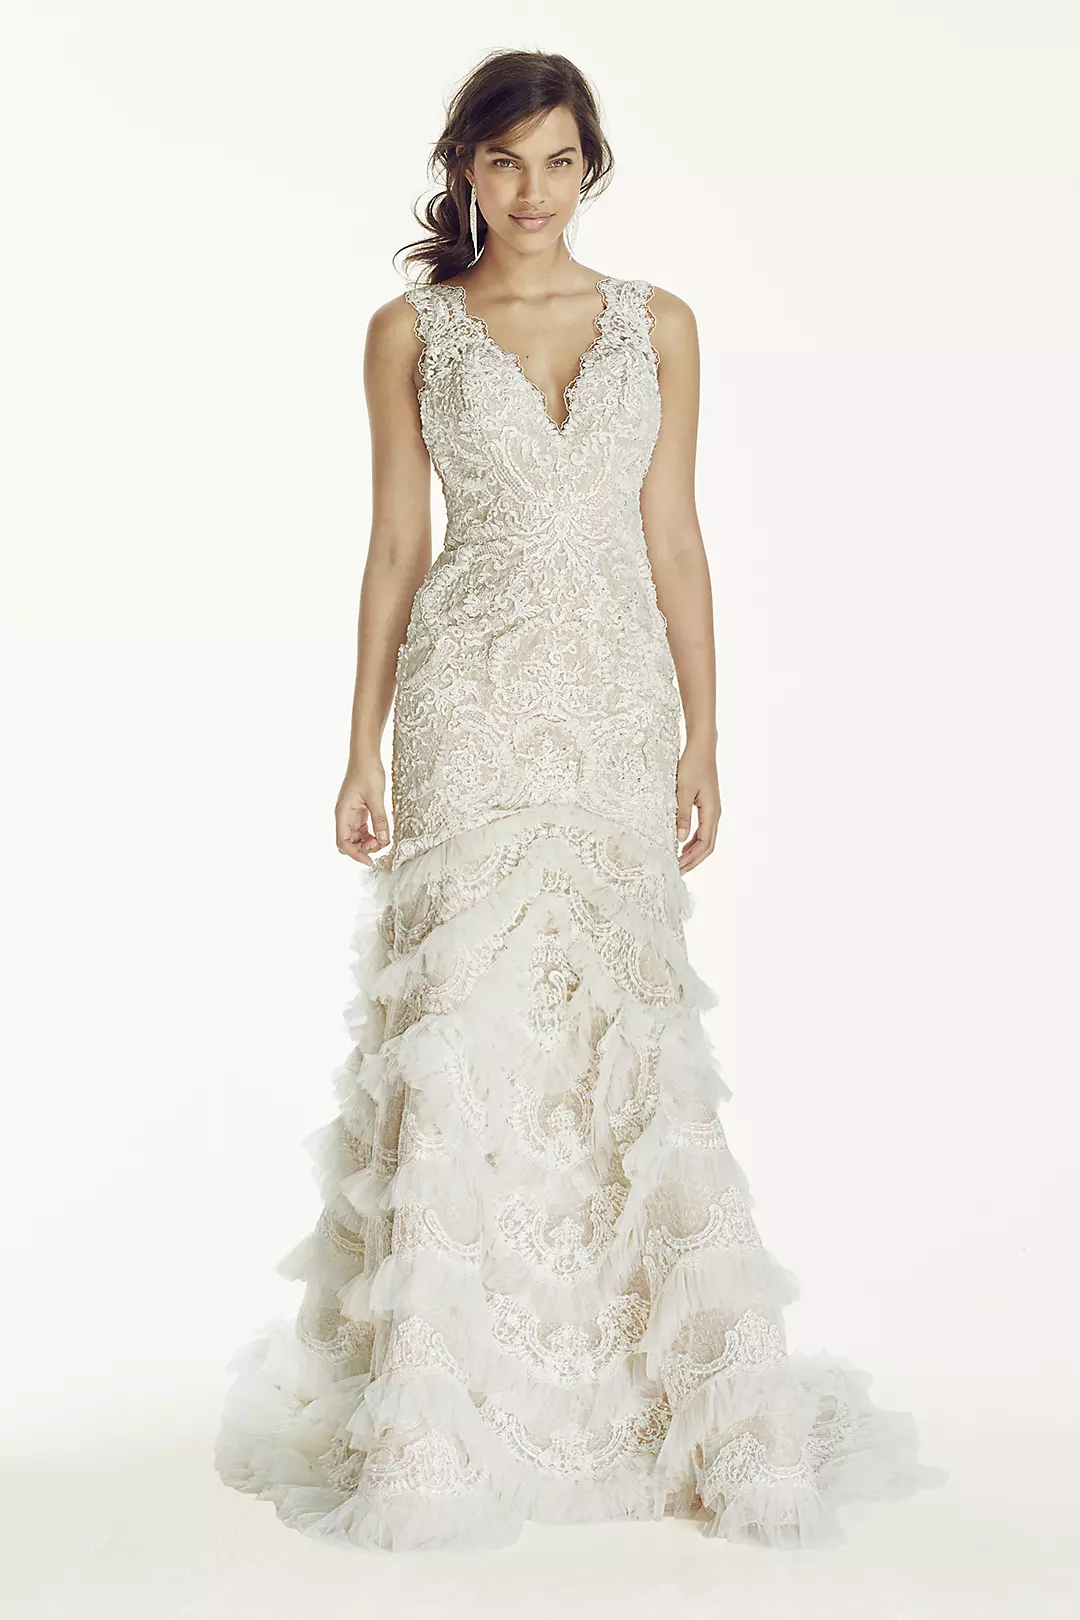 Beaded Lace Wedding Dress with Plunging Neck Image